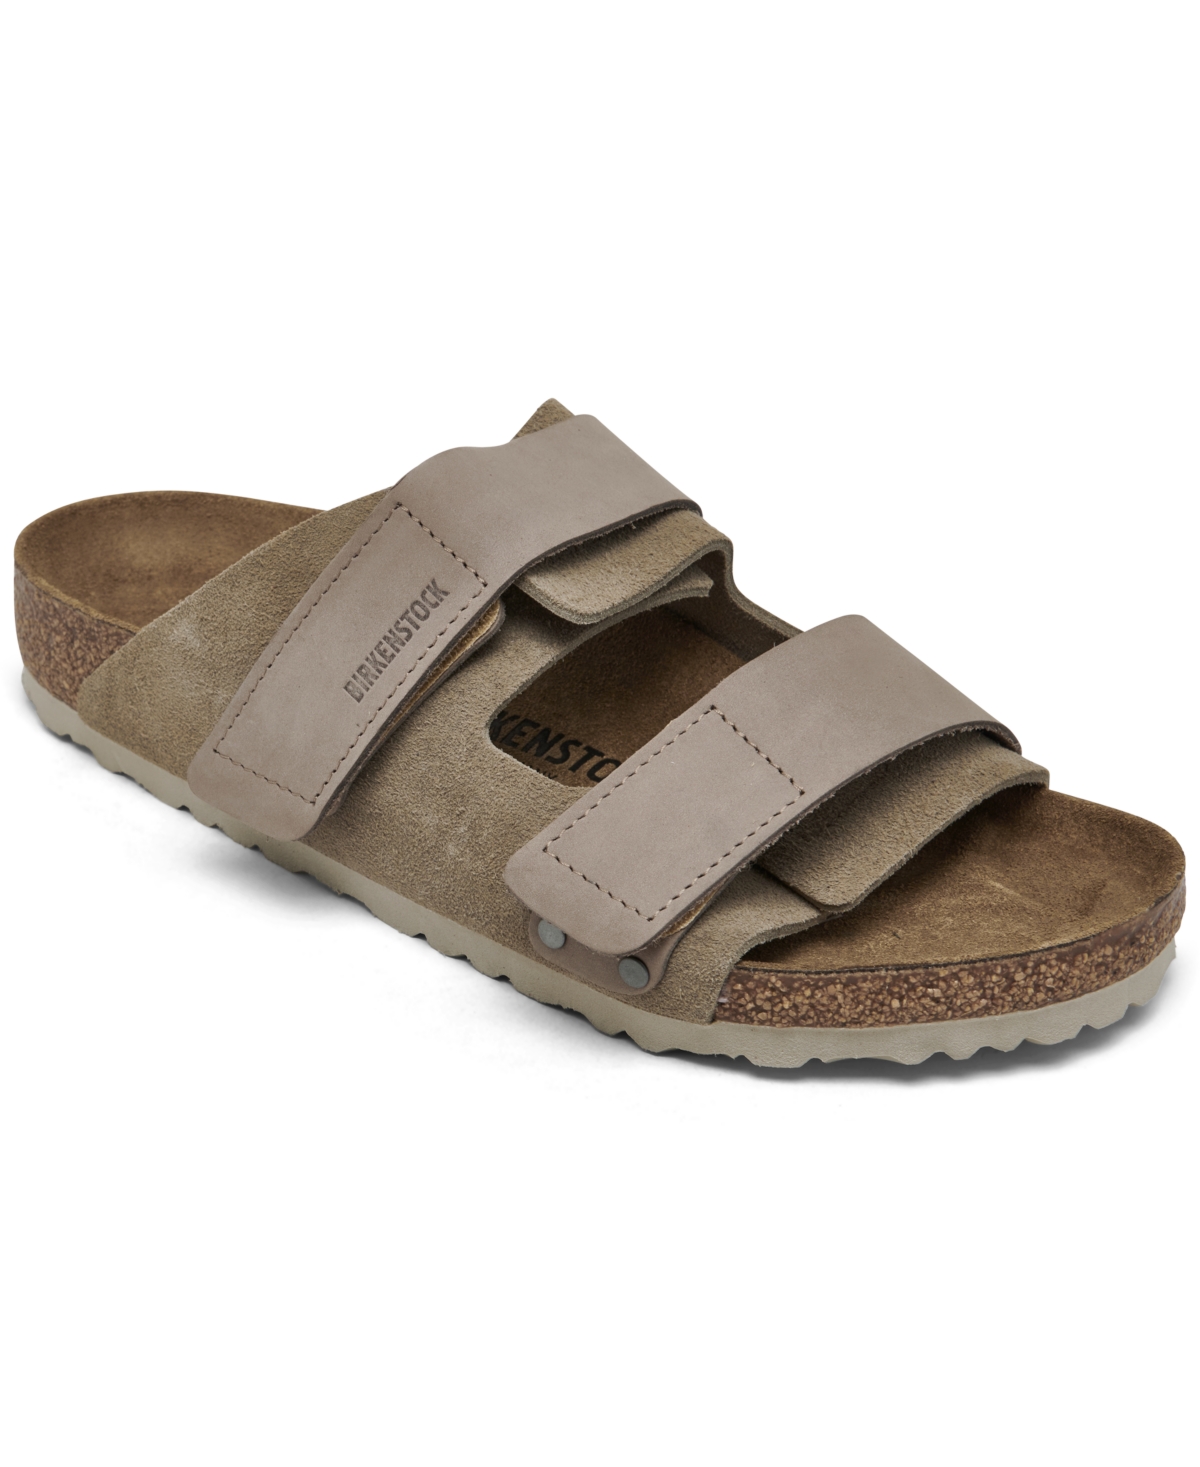 Men's Uji Nubuck Suede Leather Two-Strap Slip-On Sandals from Finish Line - Beige